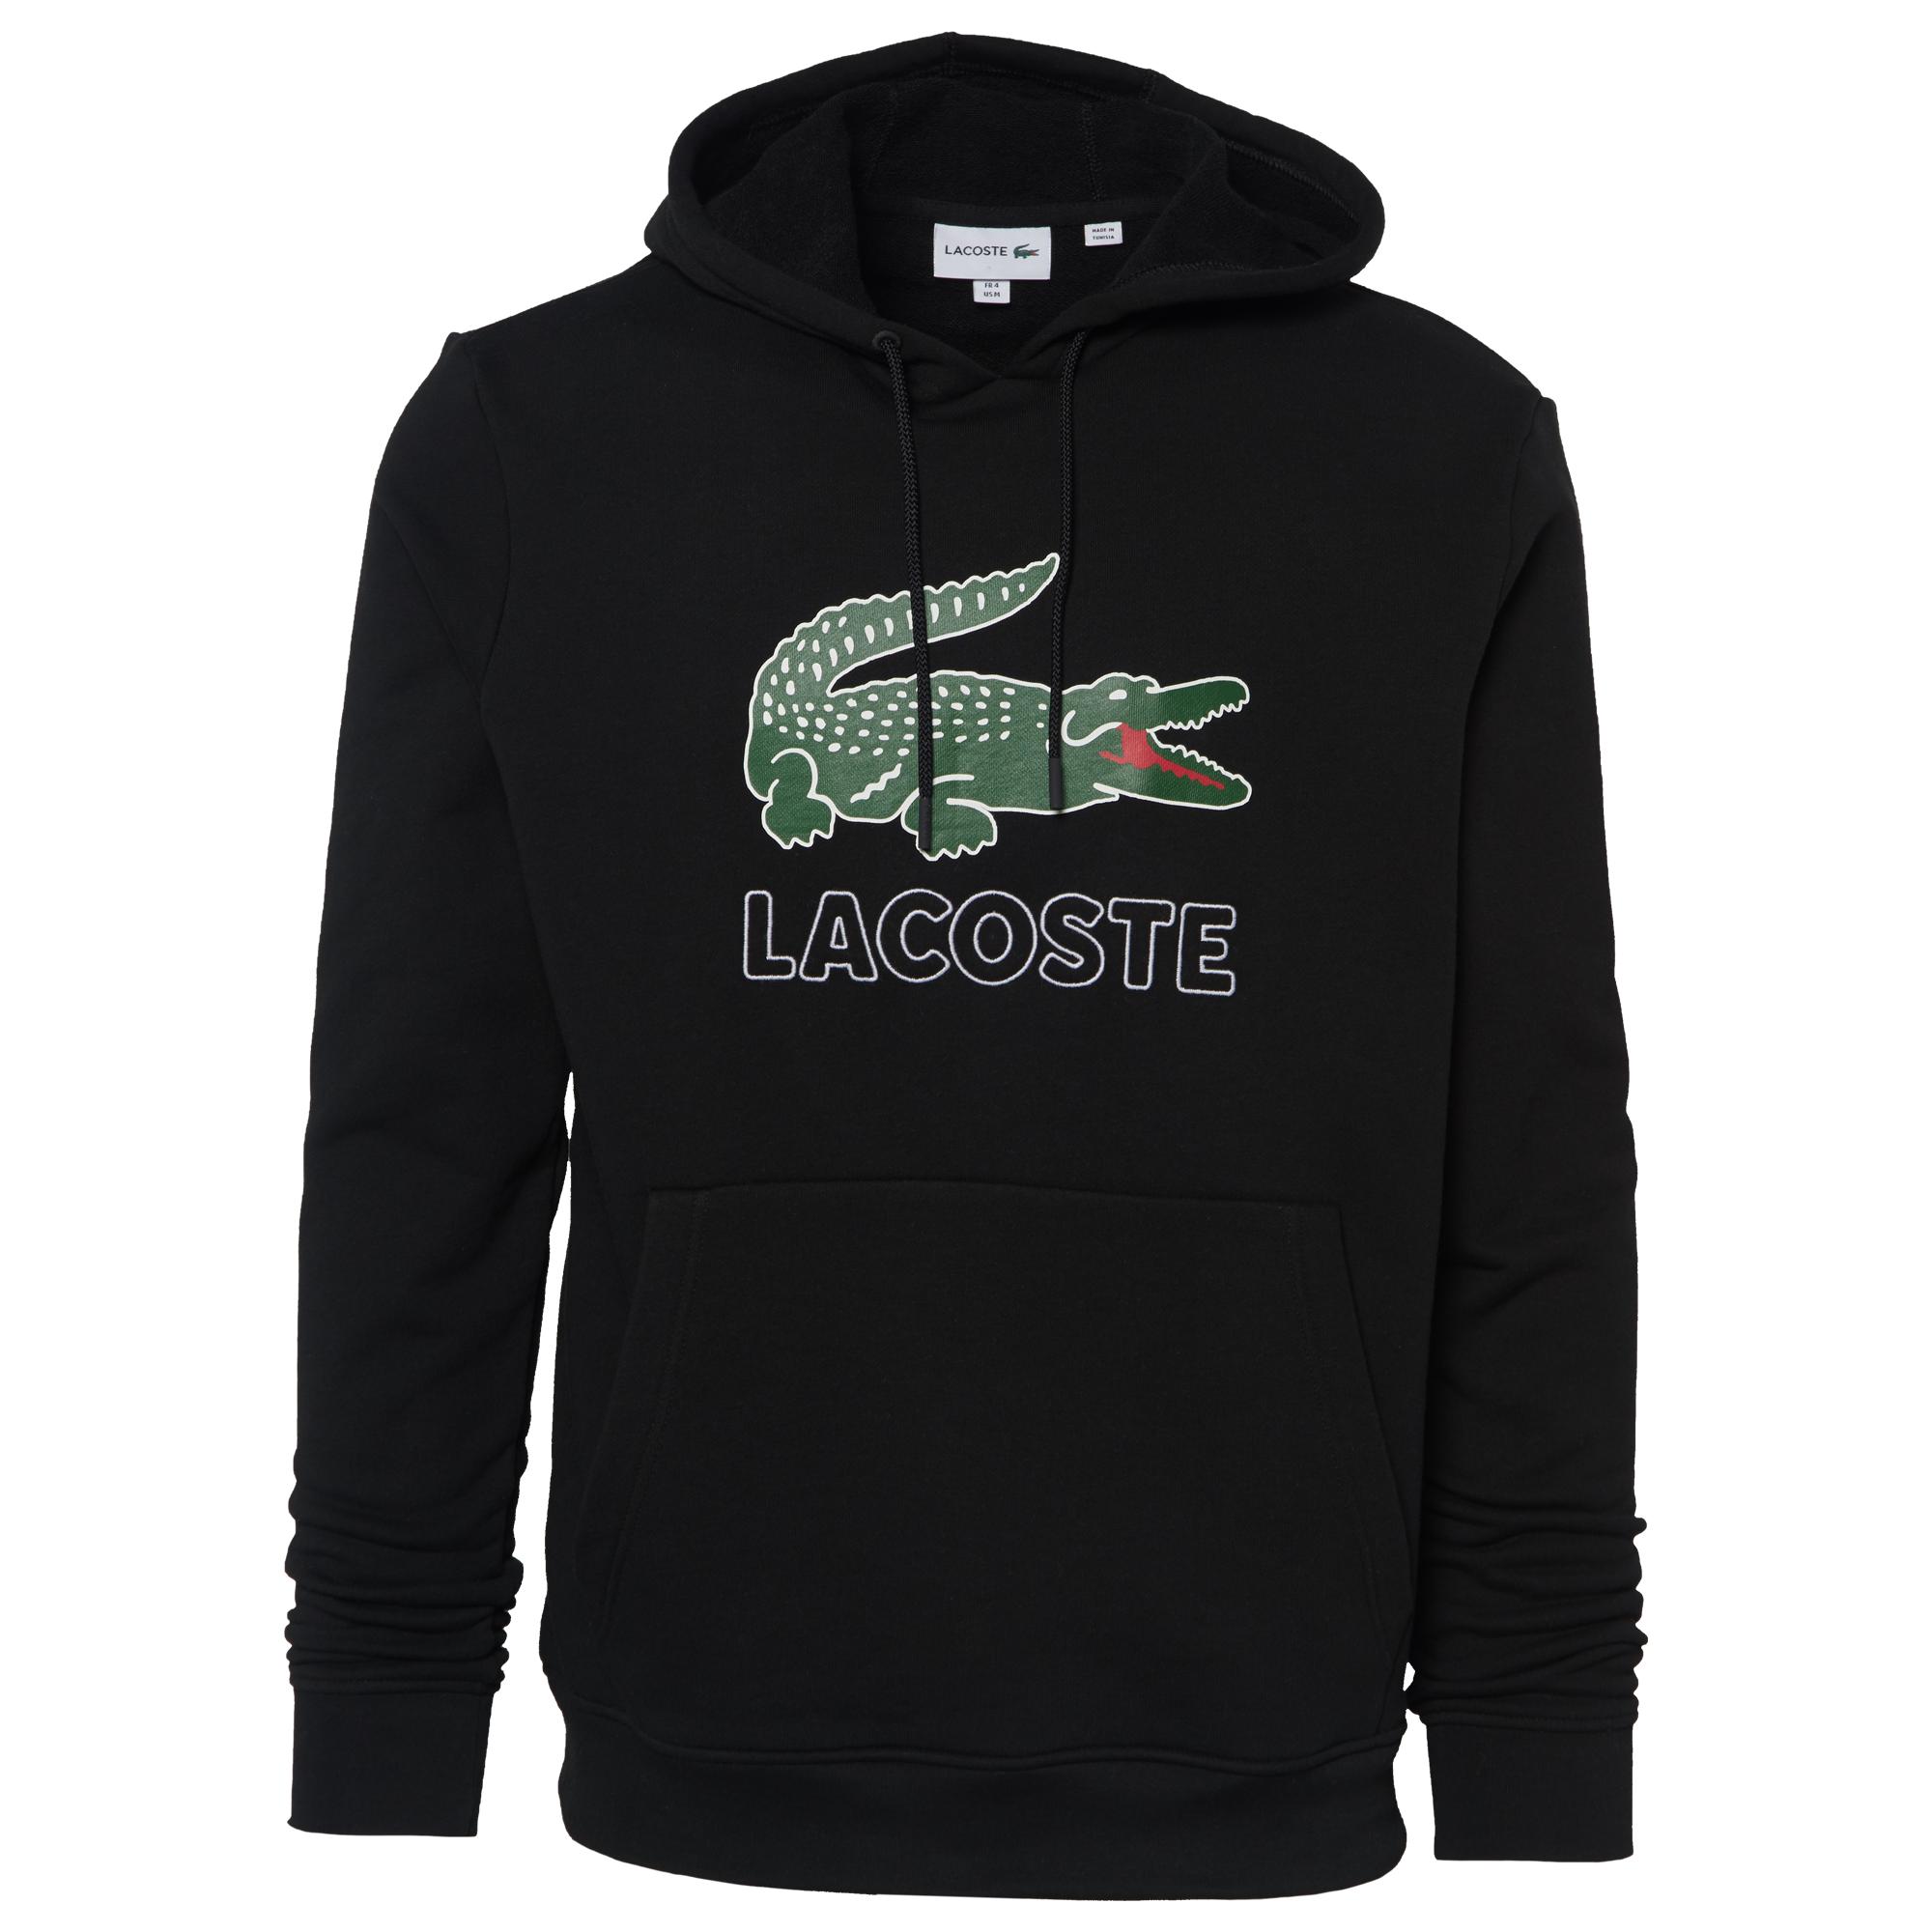 Lacoste Cotton Logo Print Hoodie in Black for Men - Save 50% - Lyst